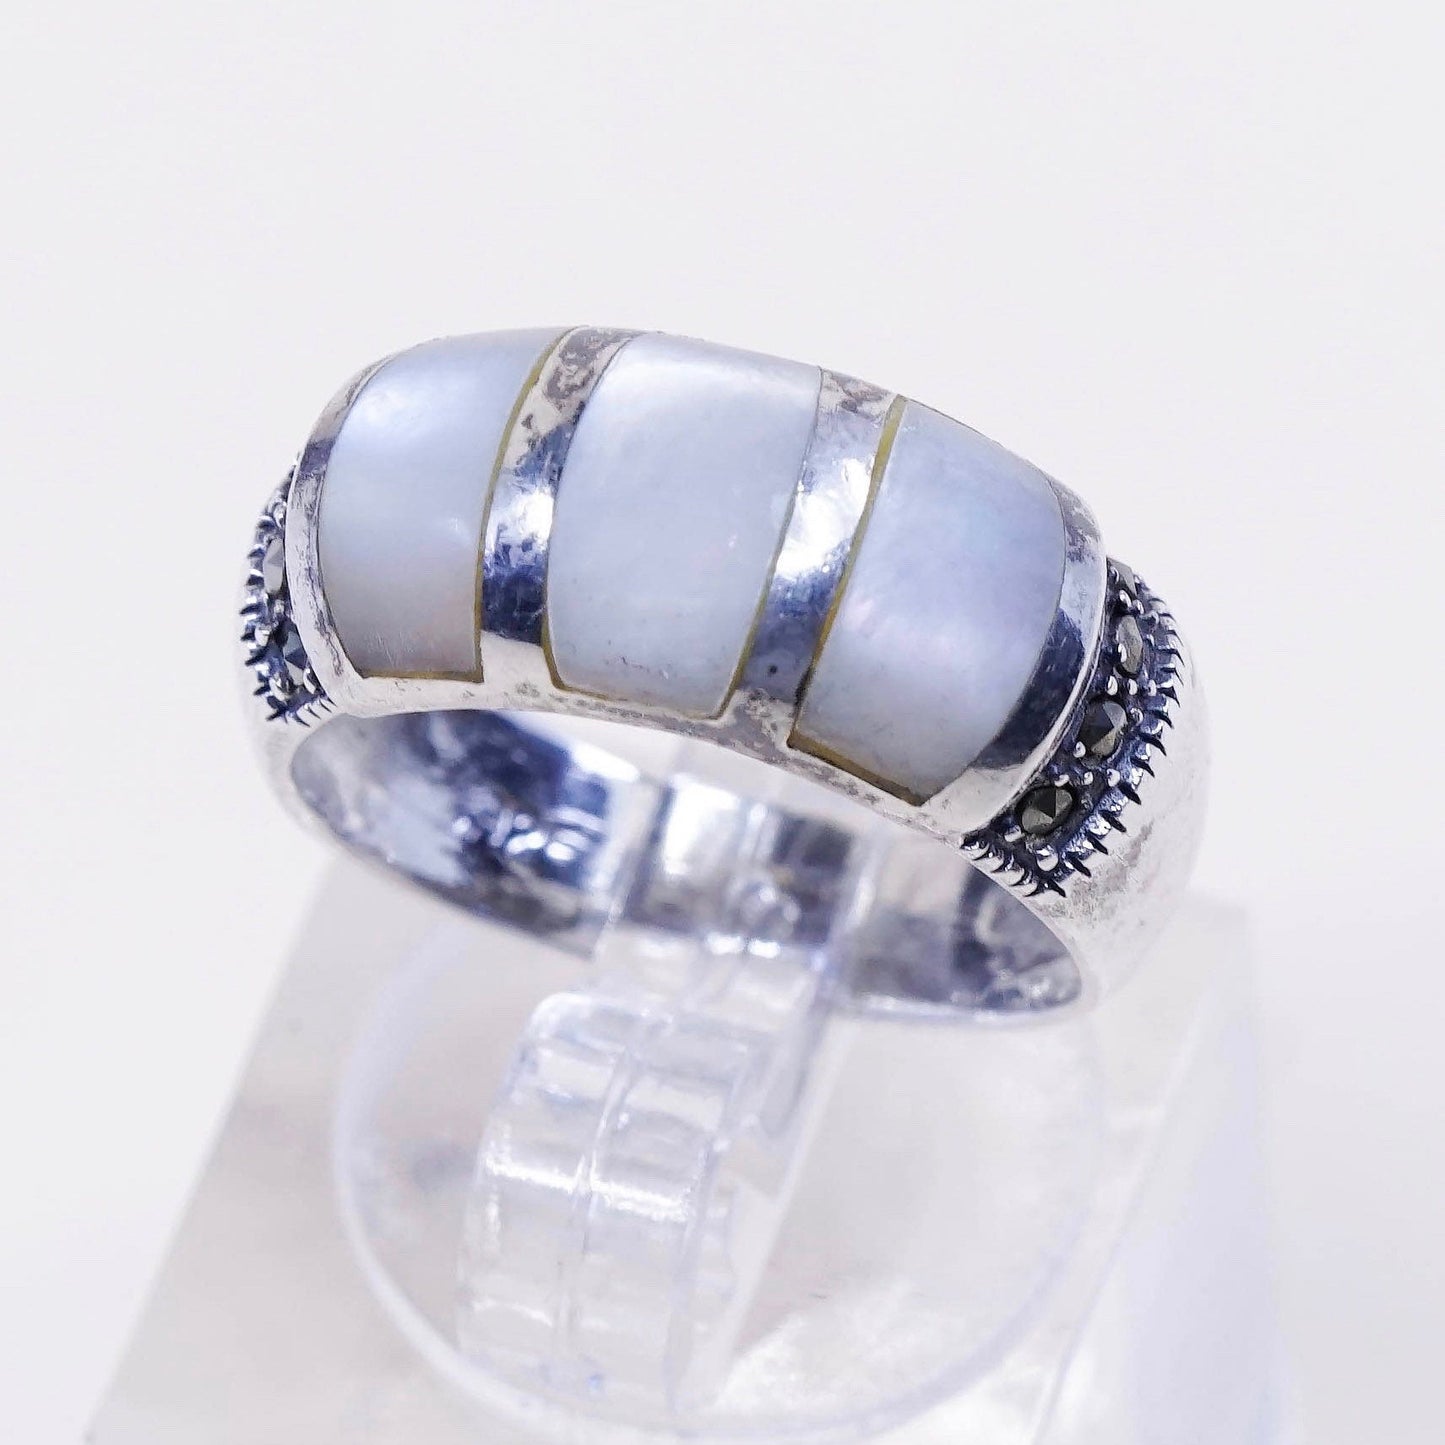 Size 6, vtg sterling 925 silver handmade ring w/ mother of pearl and marcasite